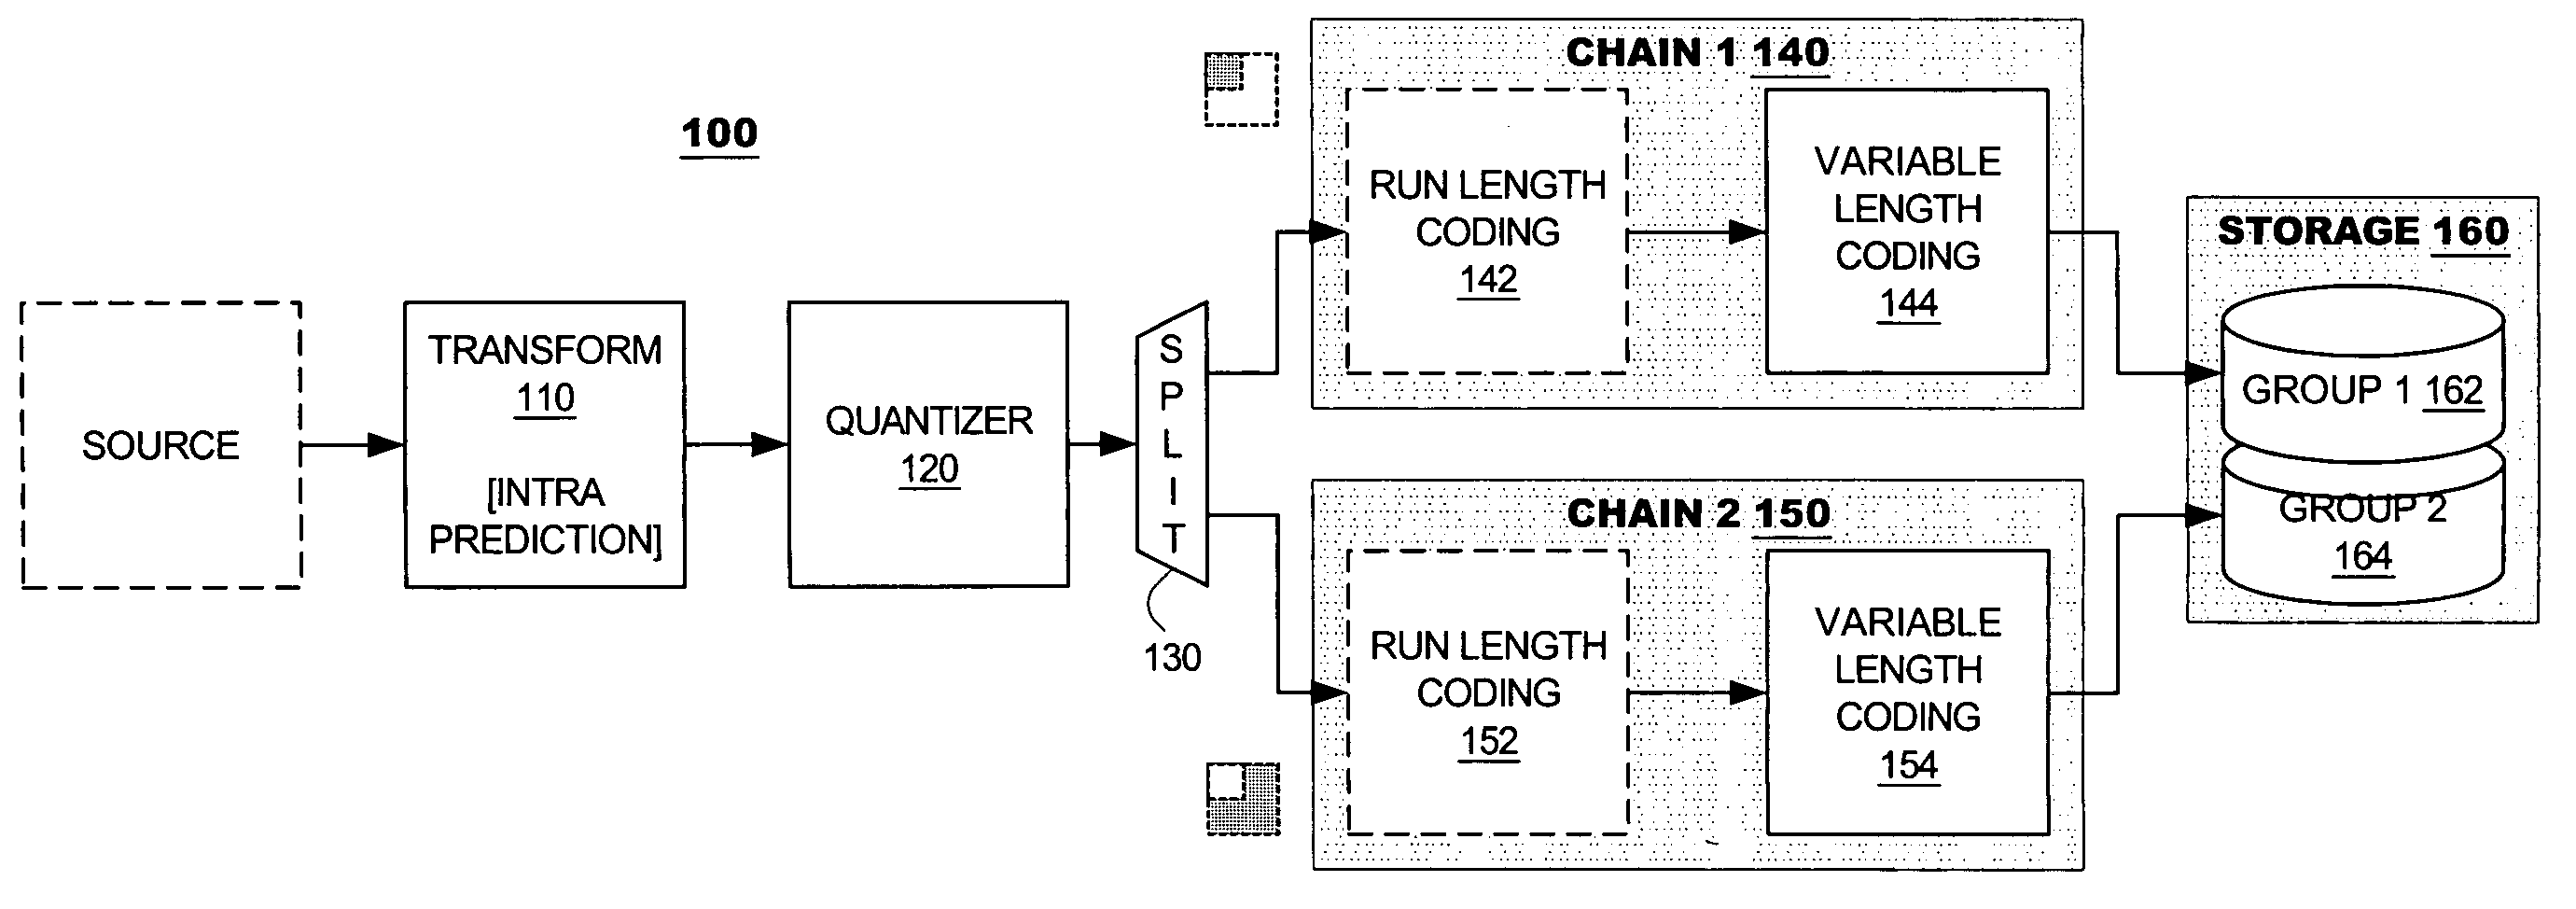 Video coding system providing separate coding chains for dynamically selected small-size or full-size playback